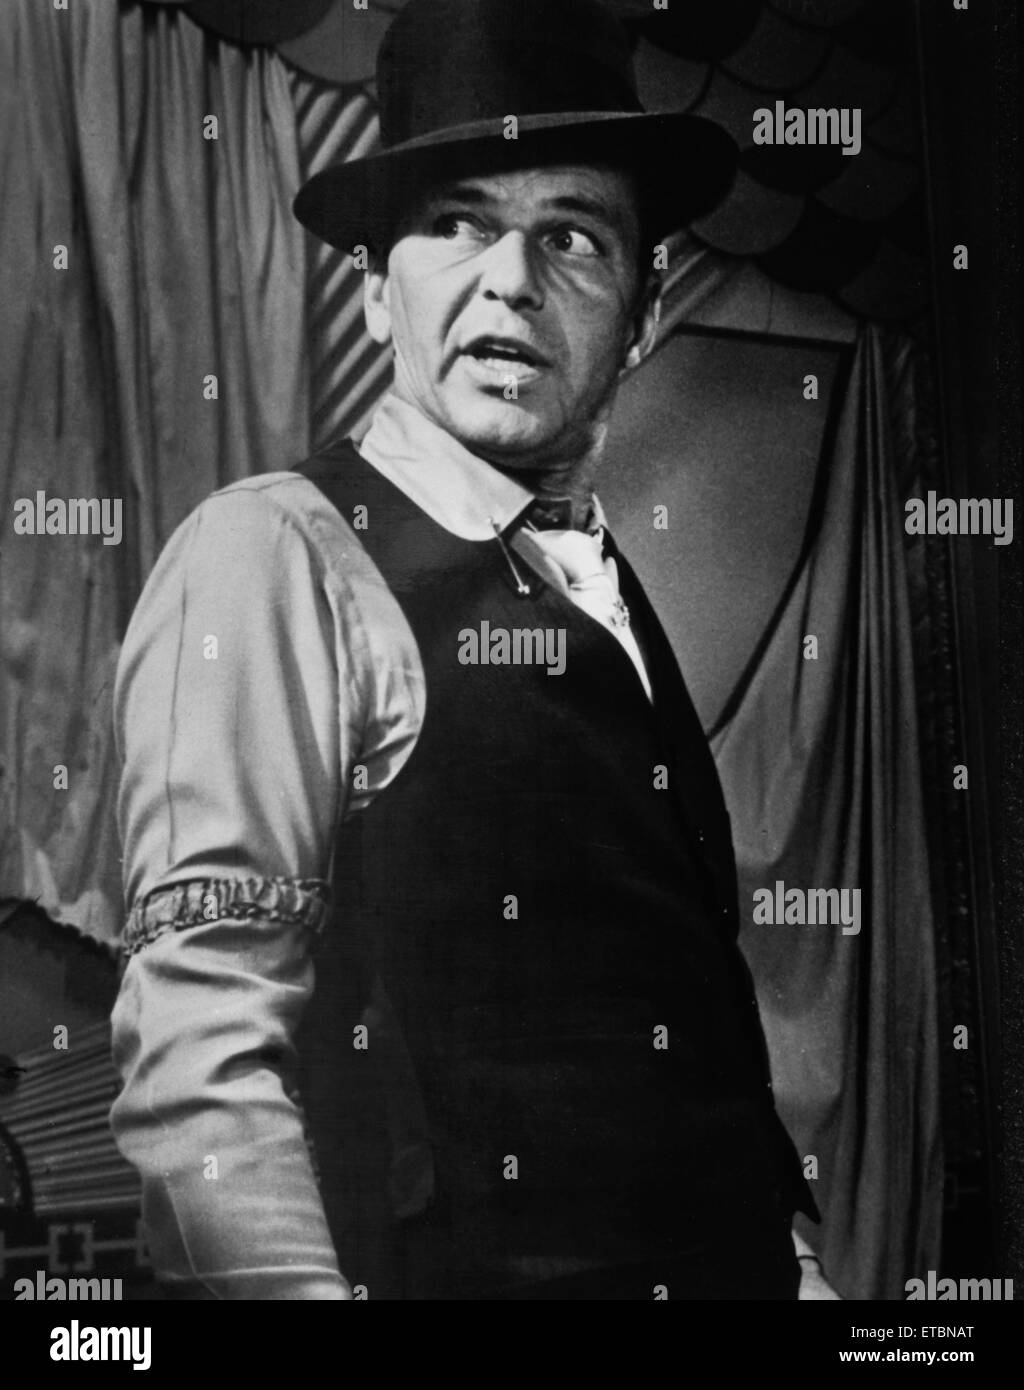 Frank Sinatra, on-set of the Film 'Robin and the 7 Hoods', 1964 Stock Photo